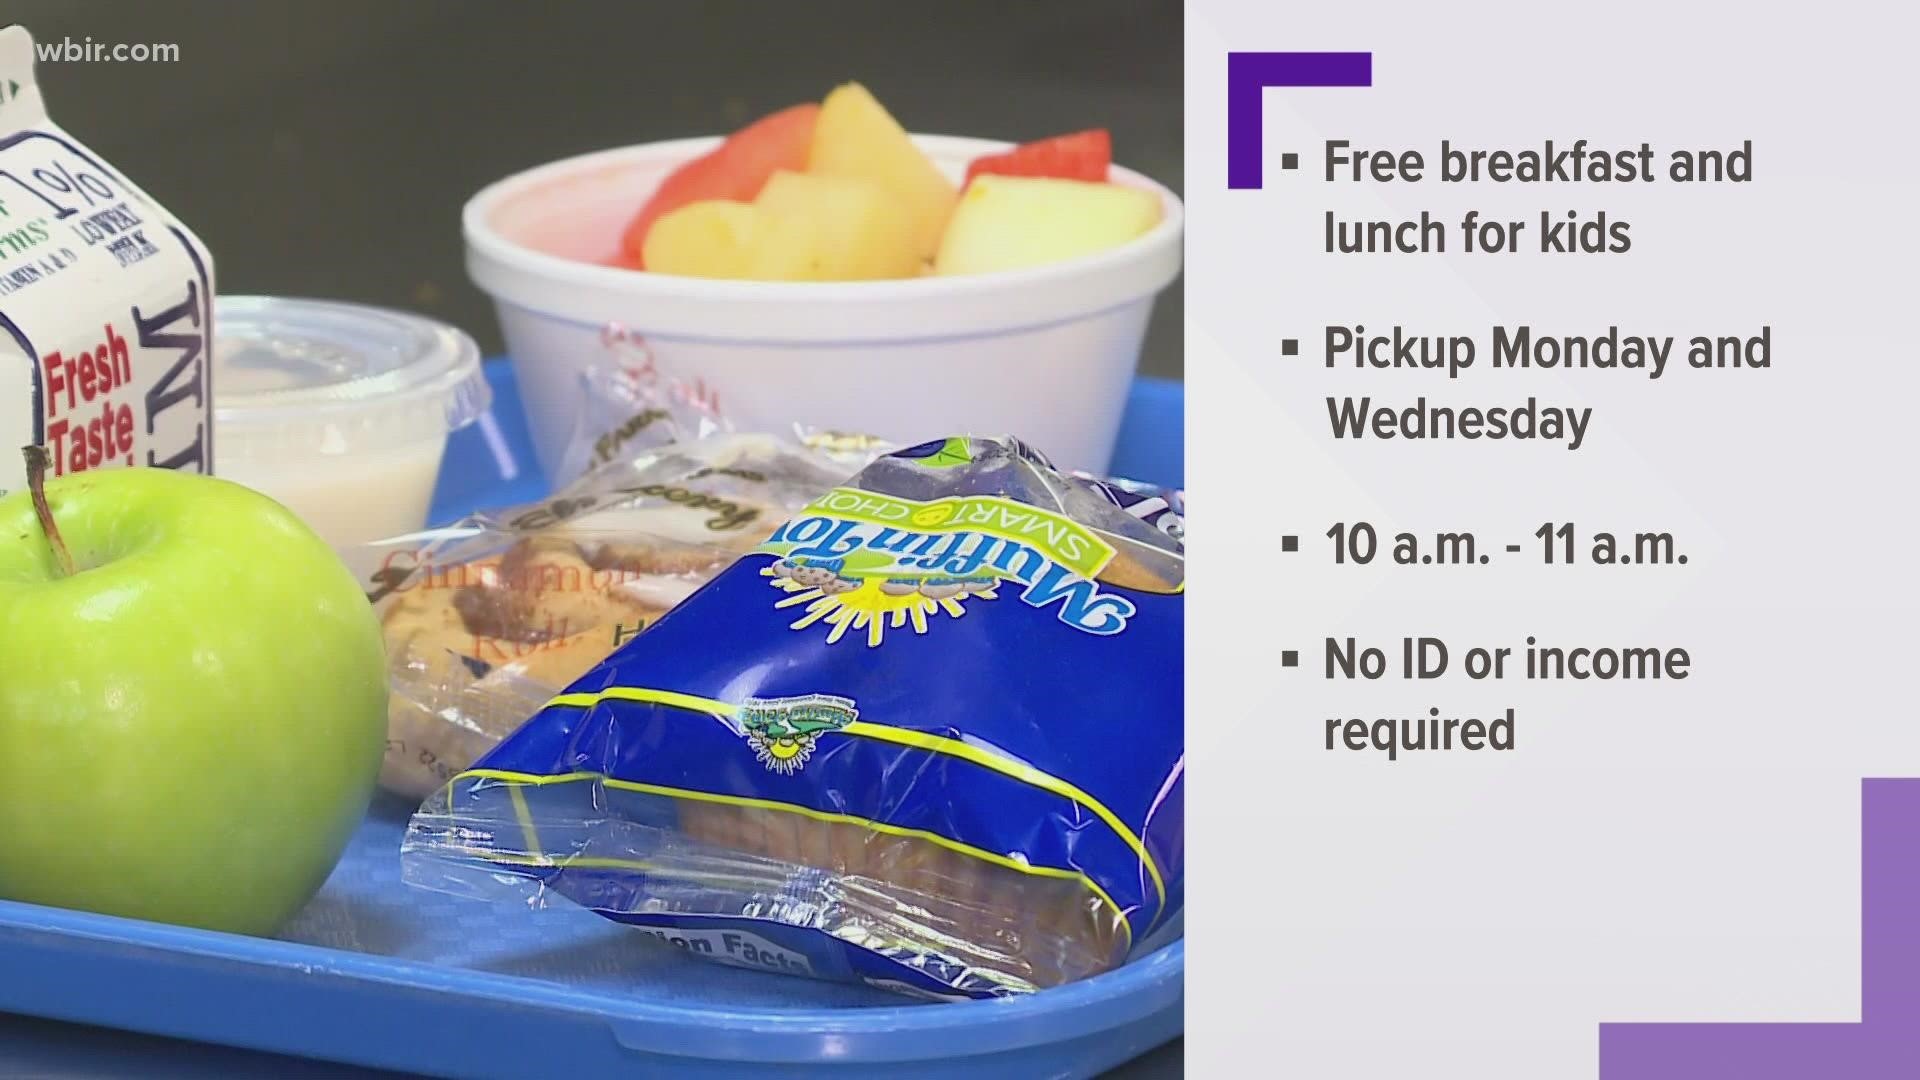 Meals will be served on Mondays and Wednesdays from 10 to 11 a.m. at several elementary and middle schools in the county.